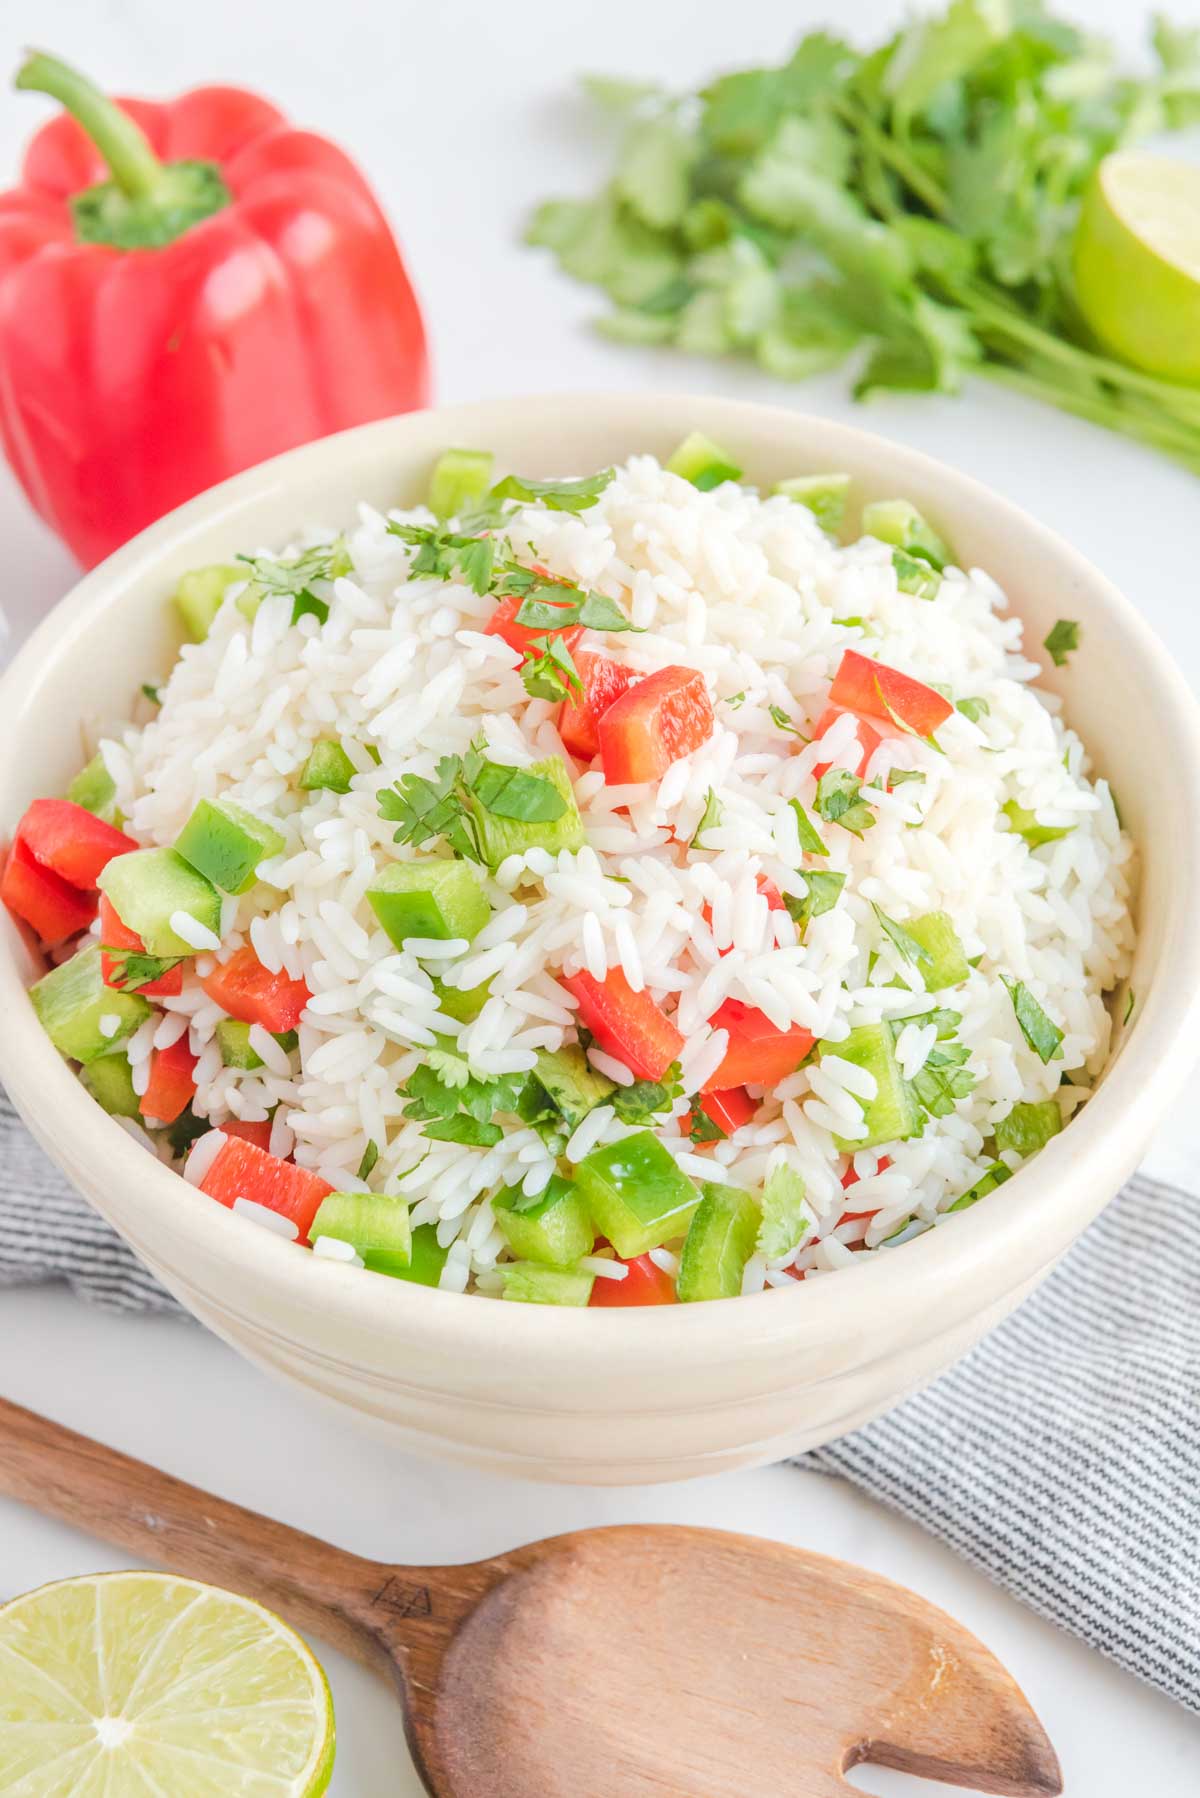 Cilantro rice with bell peppers in a bowl, a red bell pepper, and fresh cilantro.